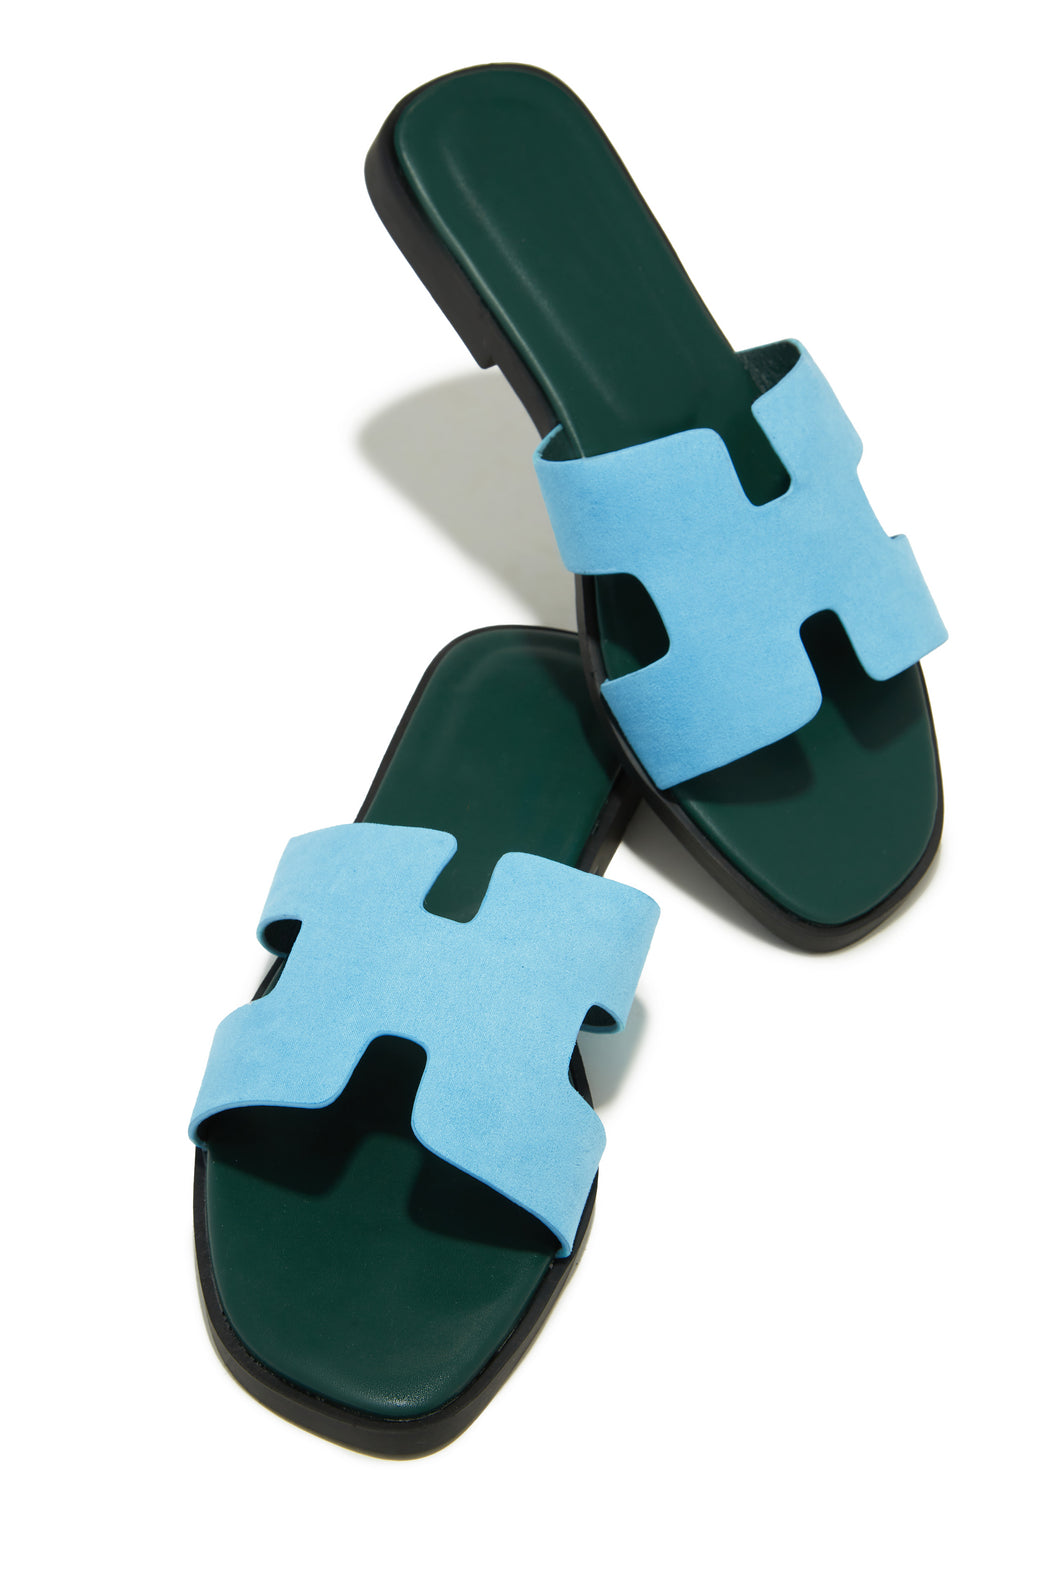 Green and Blue Vacation Sandals